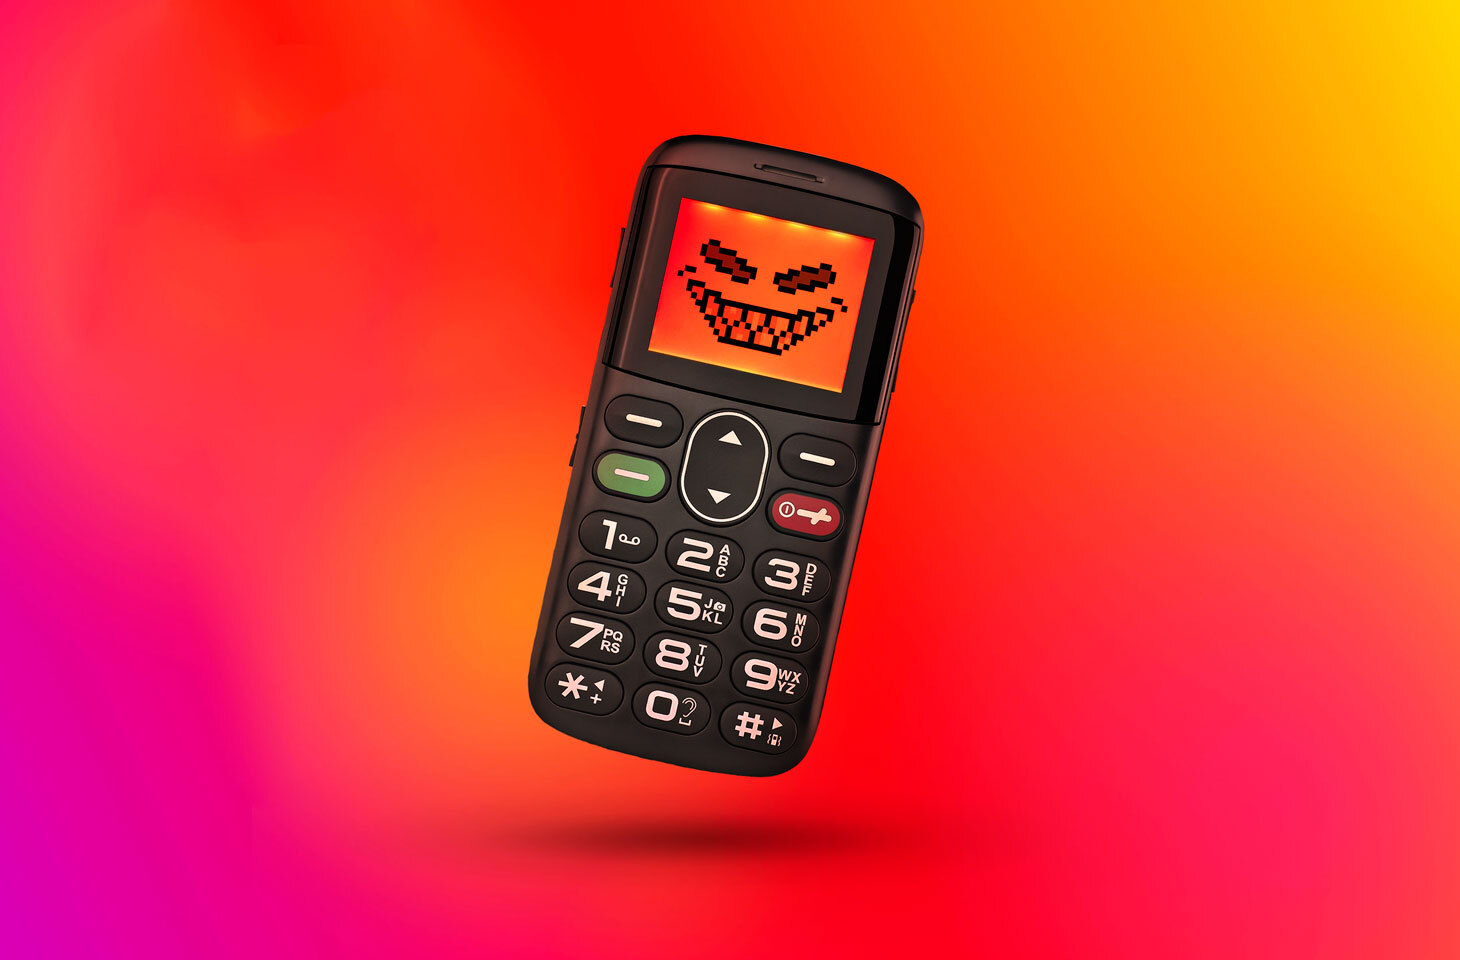 Despite their entry-level functionality, feature phones can be dangerous, too. Here’s why